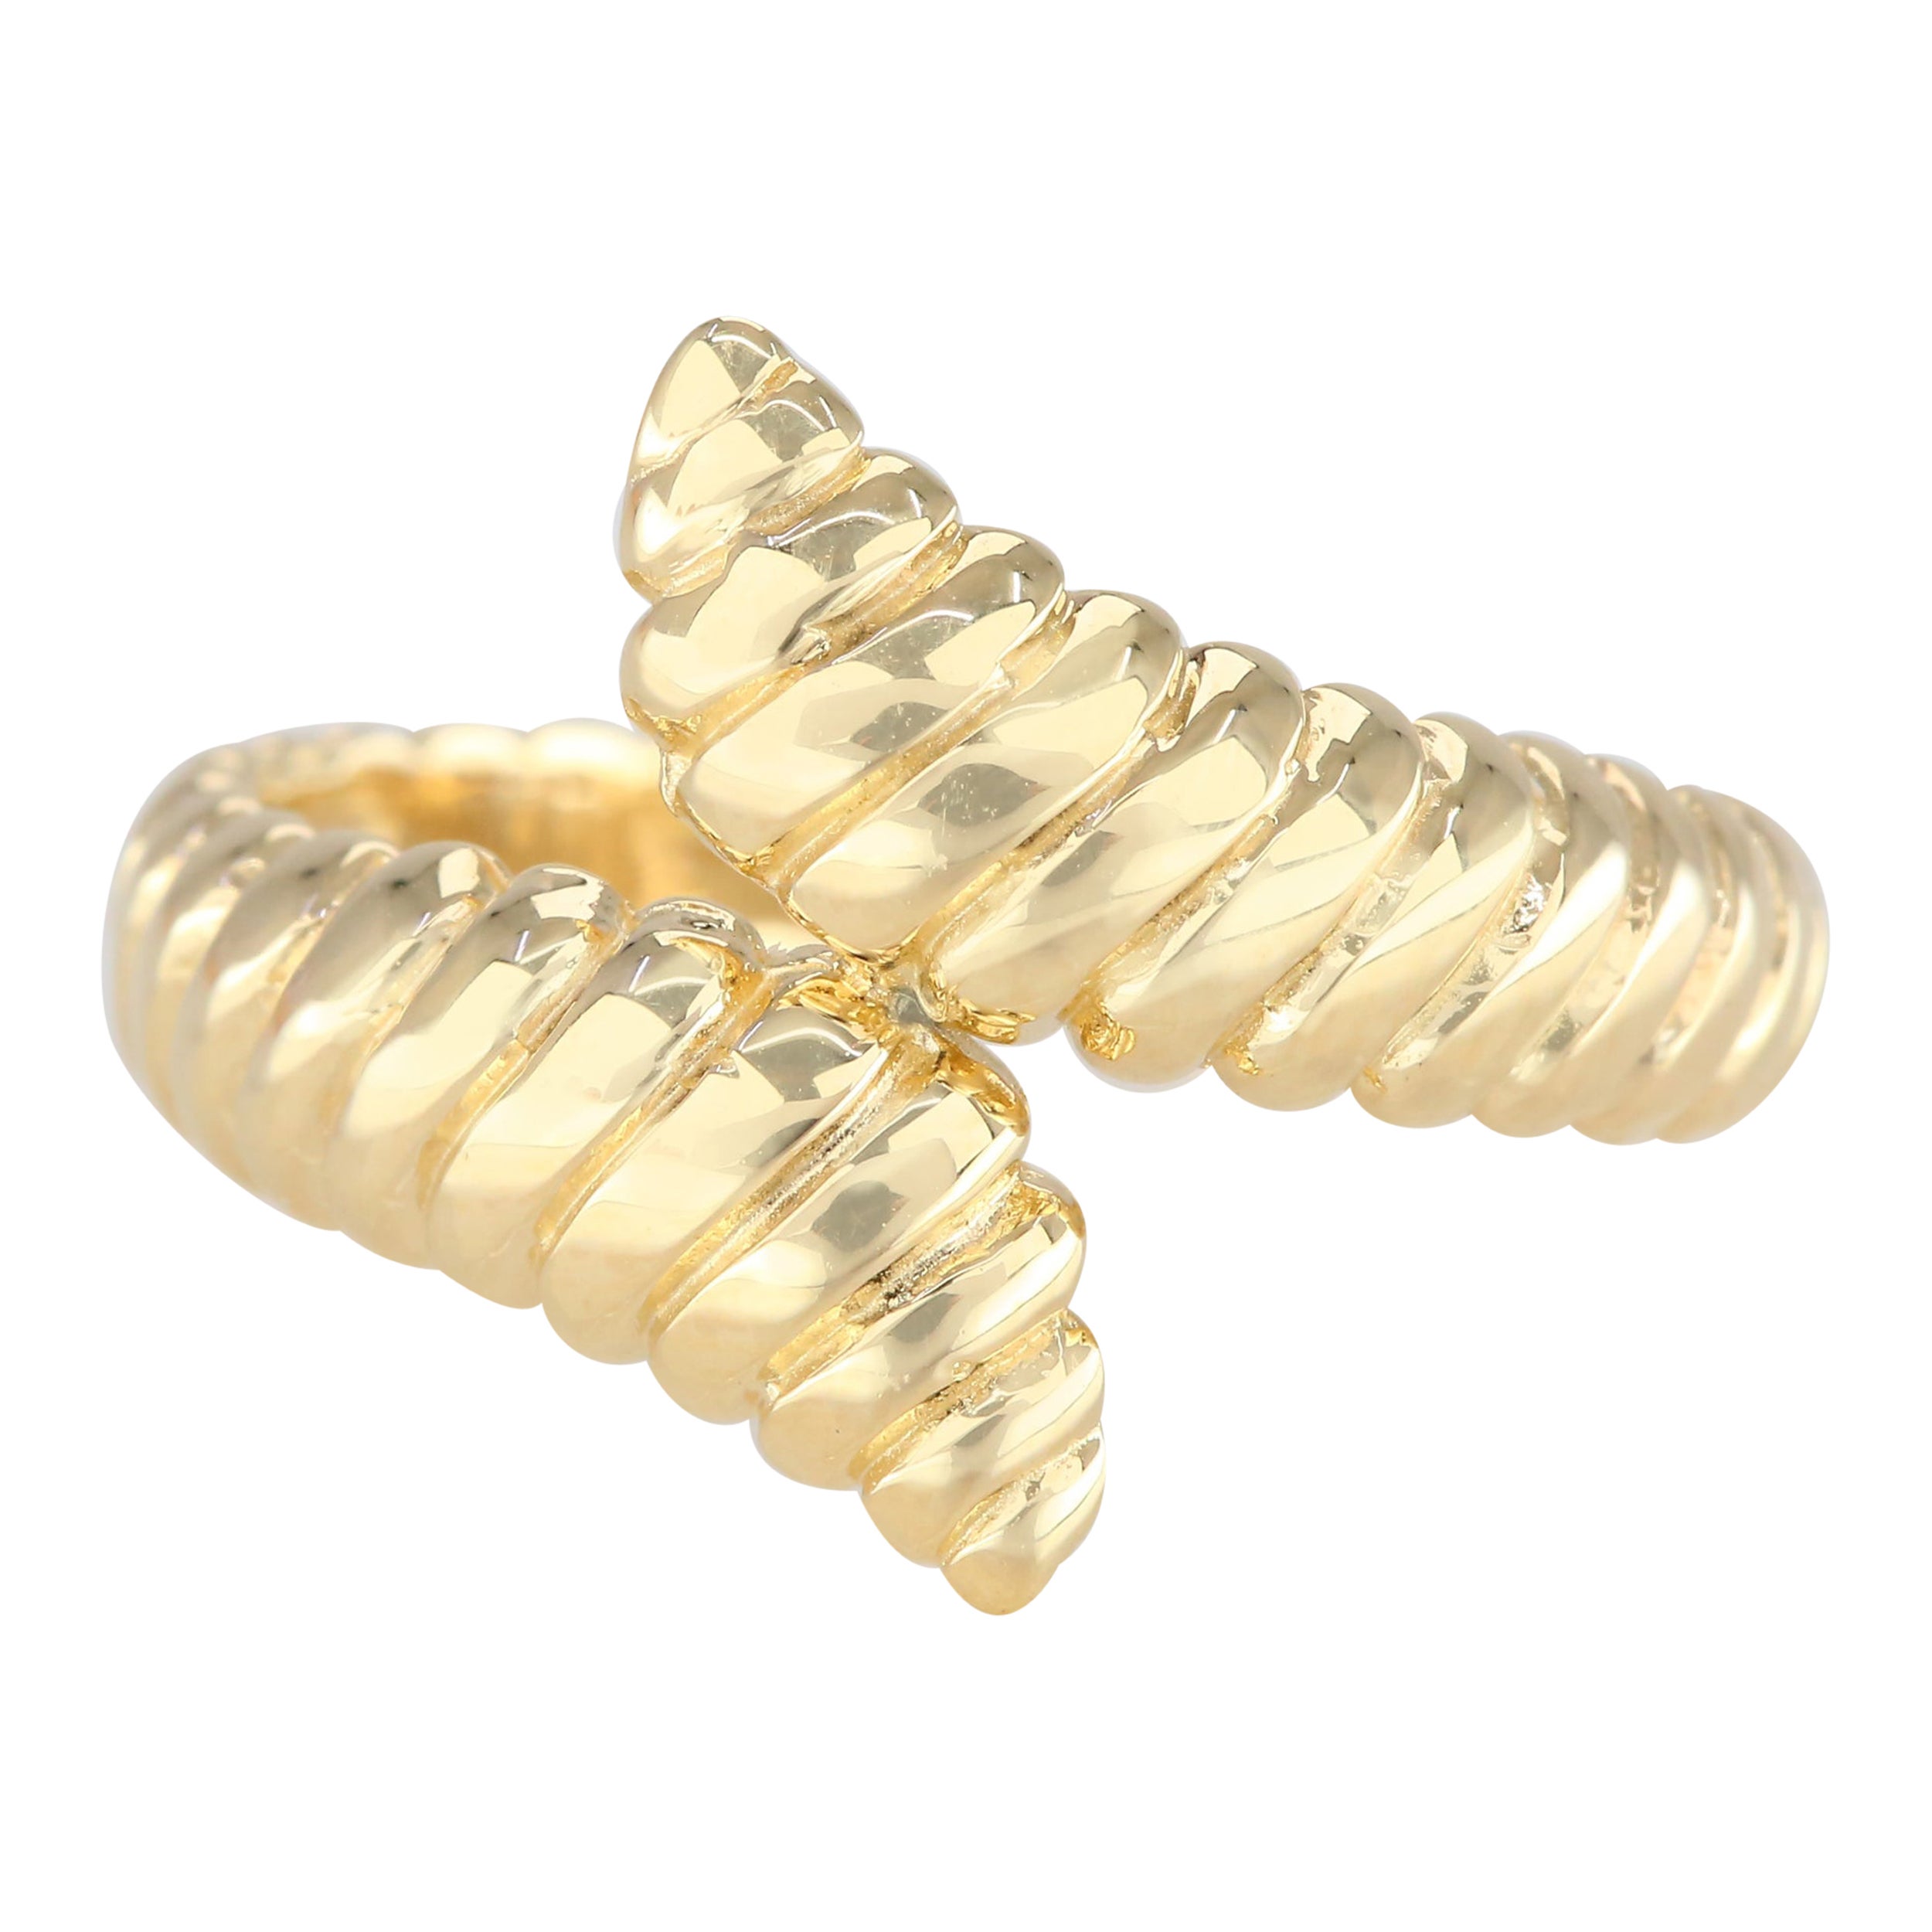 For Sale:  14K Gold Wavy Dome Ring, 14K Gold Croissant Ring, Wavy Croissant Ring